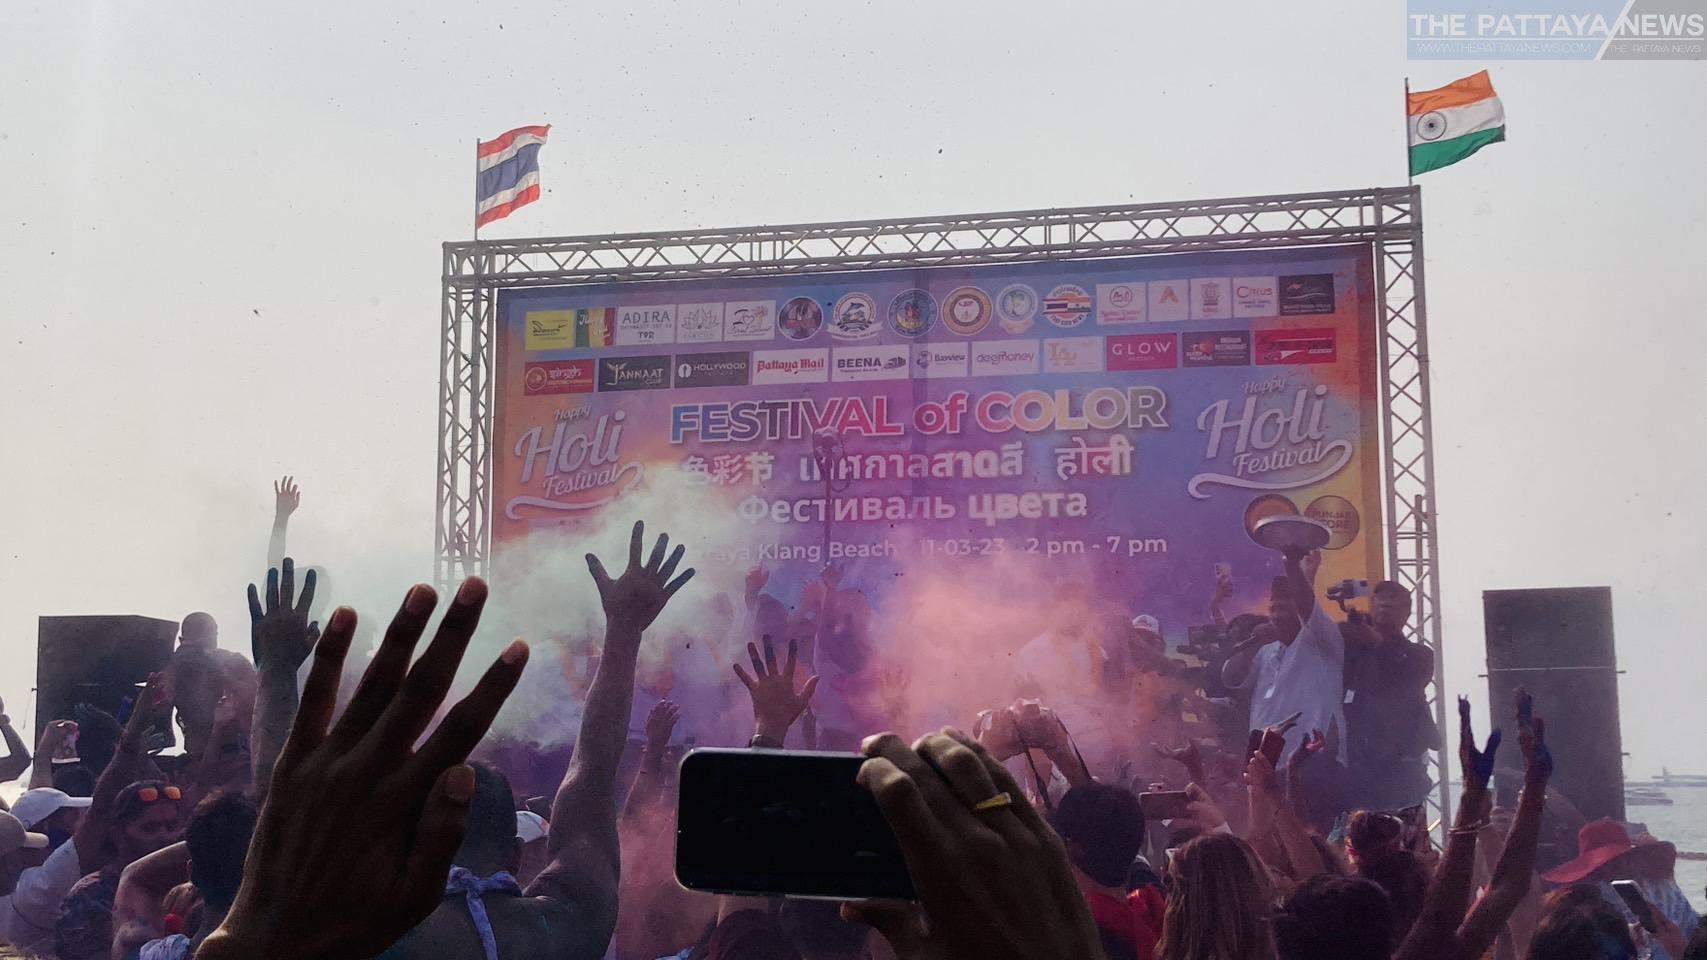 festival-of-colors-(holi)-held-in-pattaya-and-draws-happy,-energetic-crowd-–-the-pattaya-news